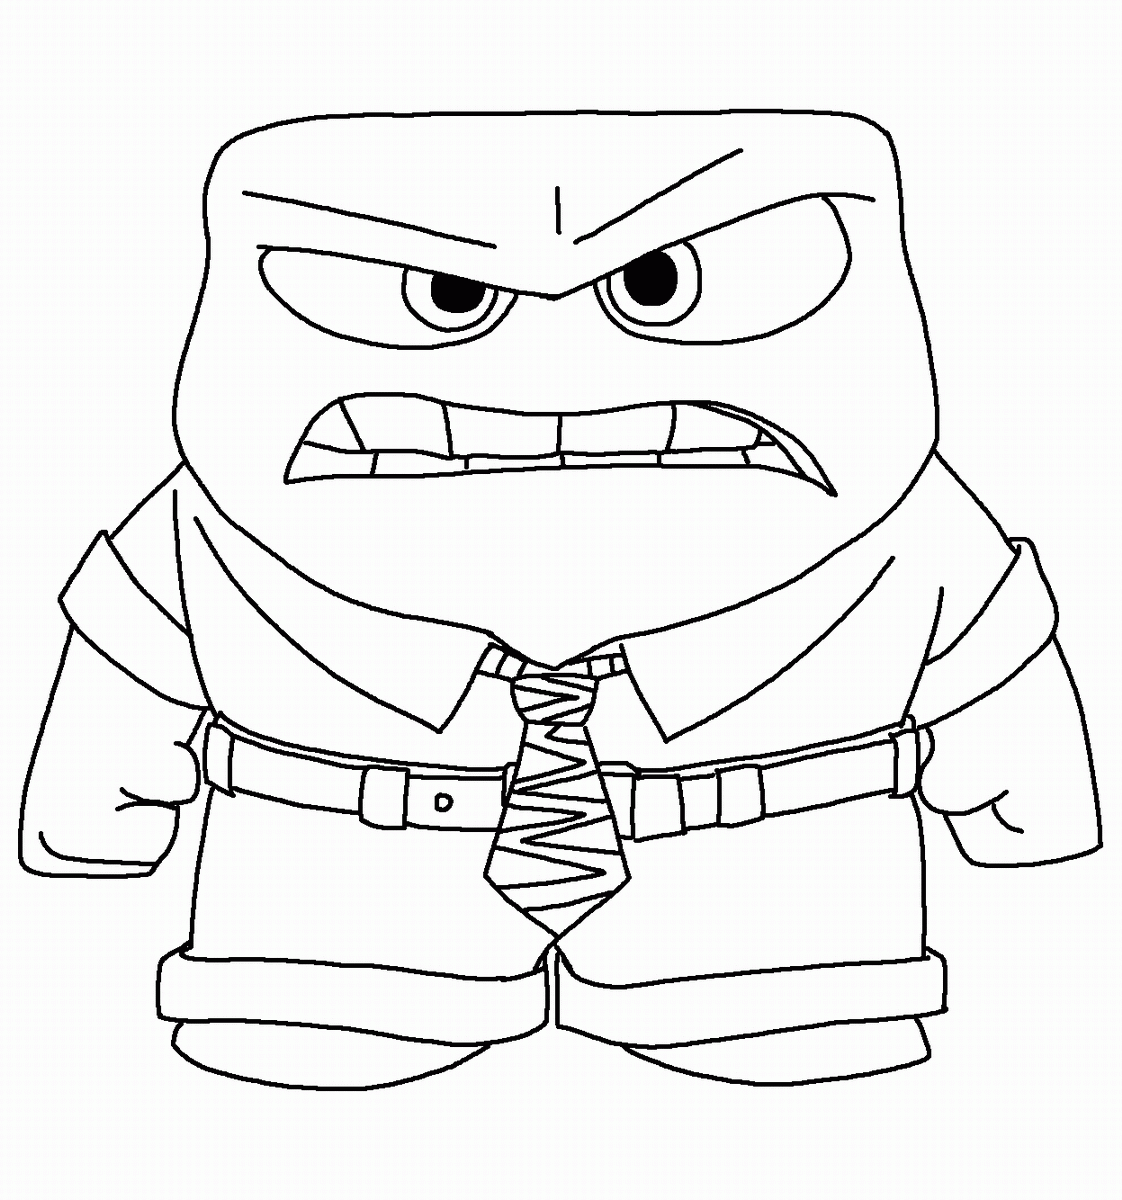 Inside Out Coloring Pages TV Film InsideOut_coloring_9 Printable 2020 03973 Coloring4free